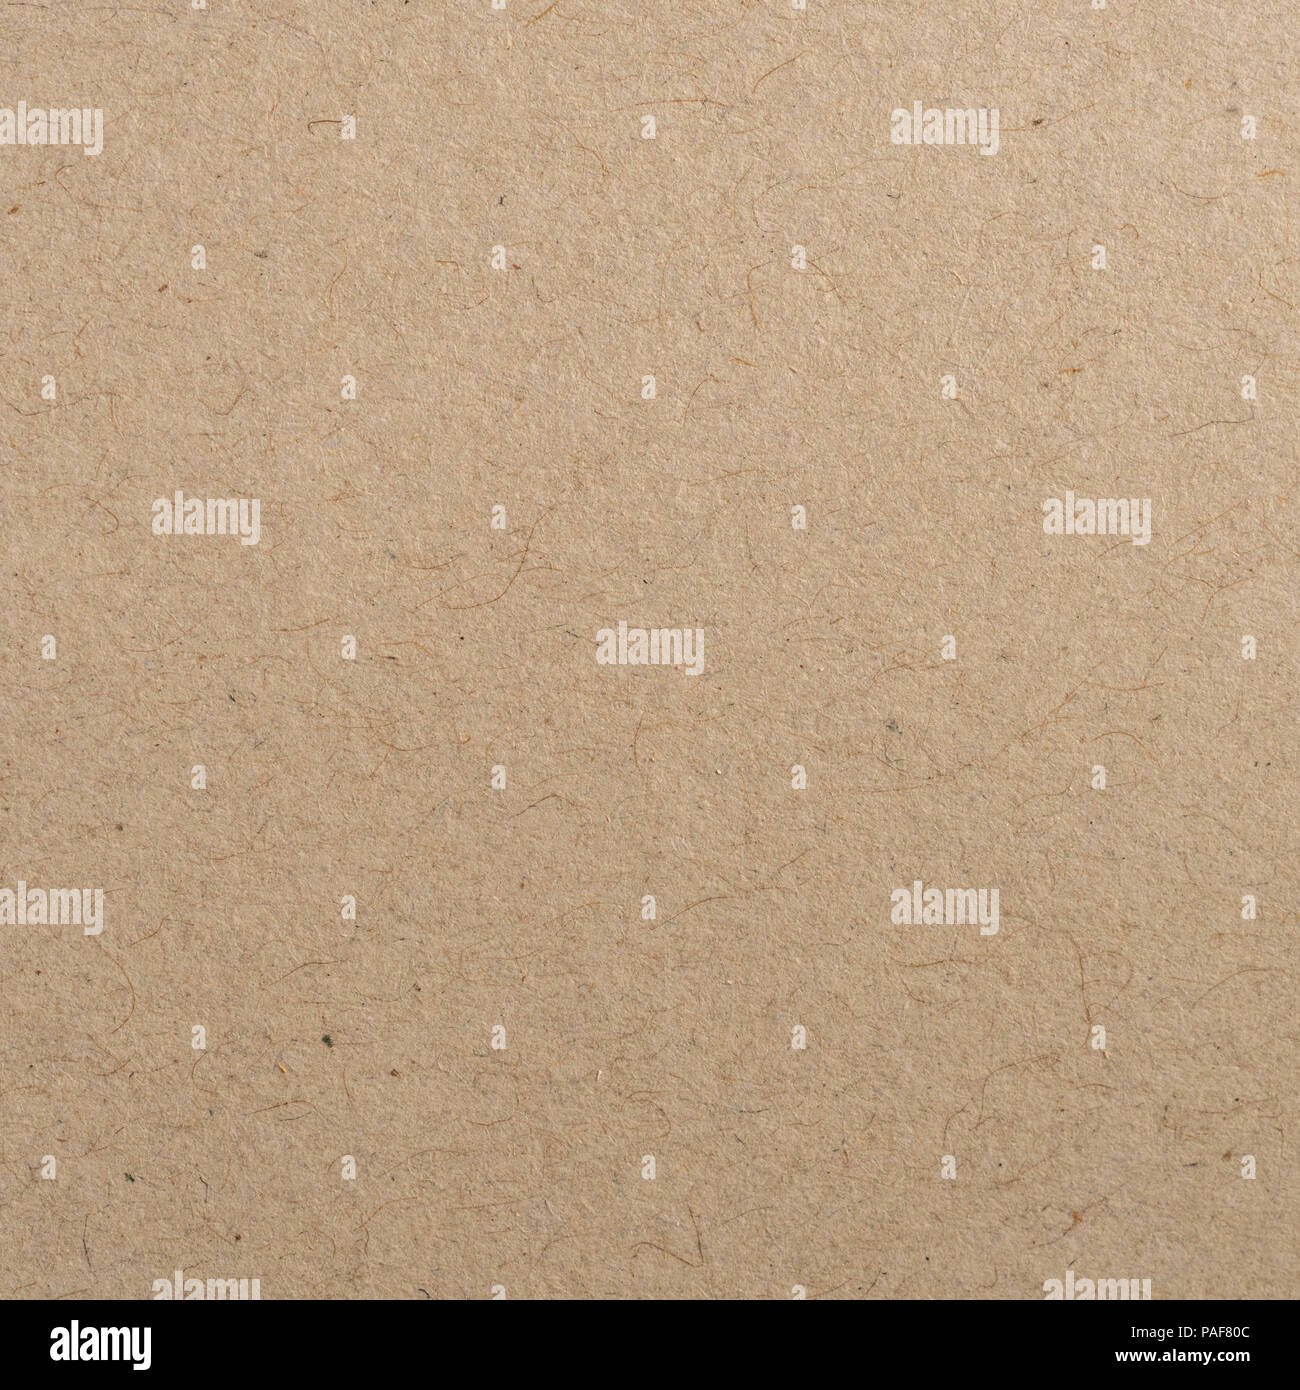 Kraft Paper (Speckletone, Text Weight) – French Paper